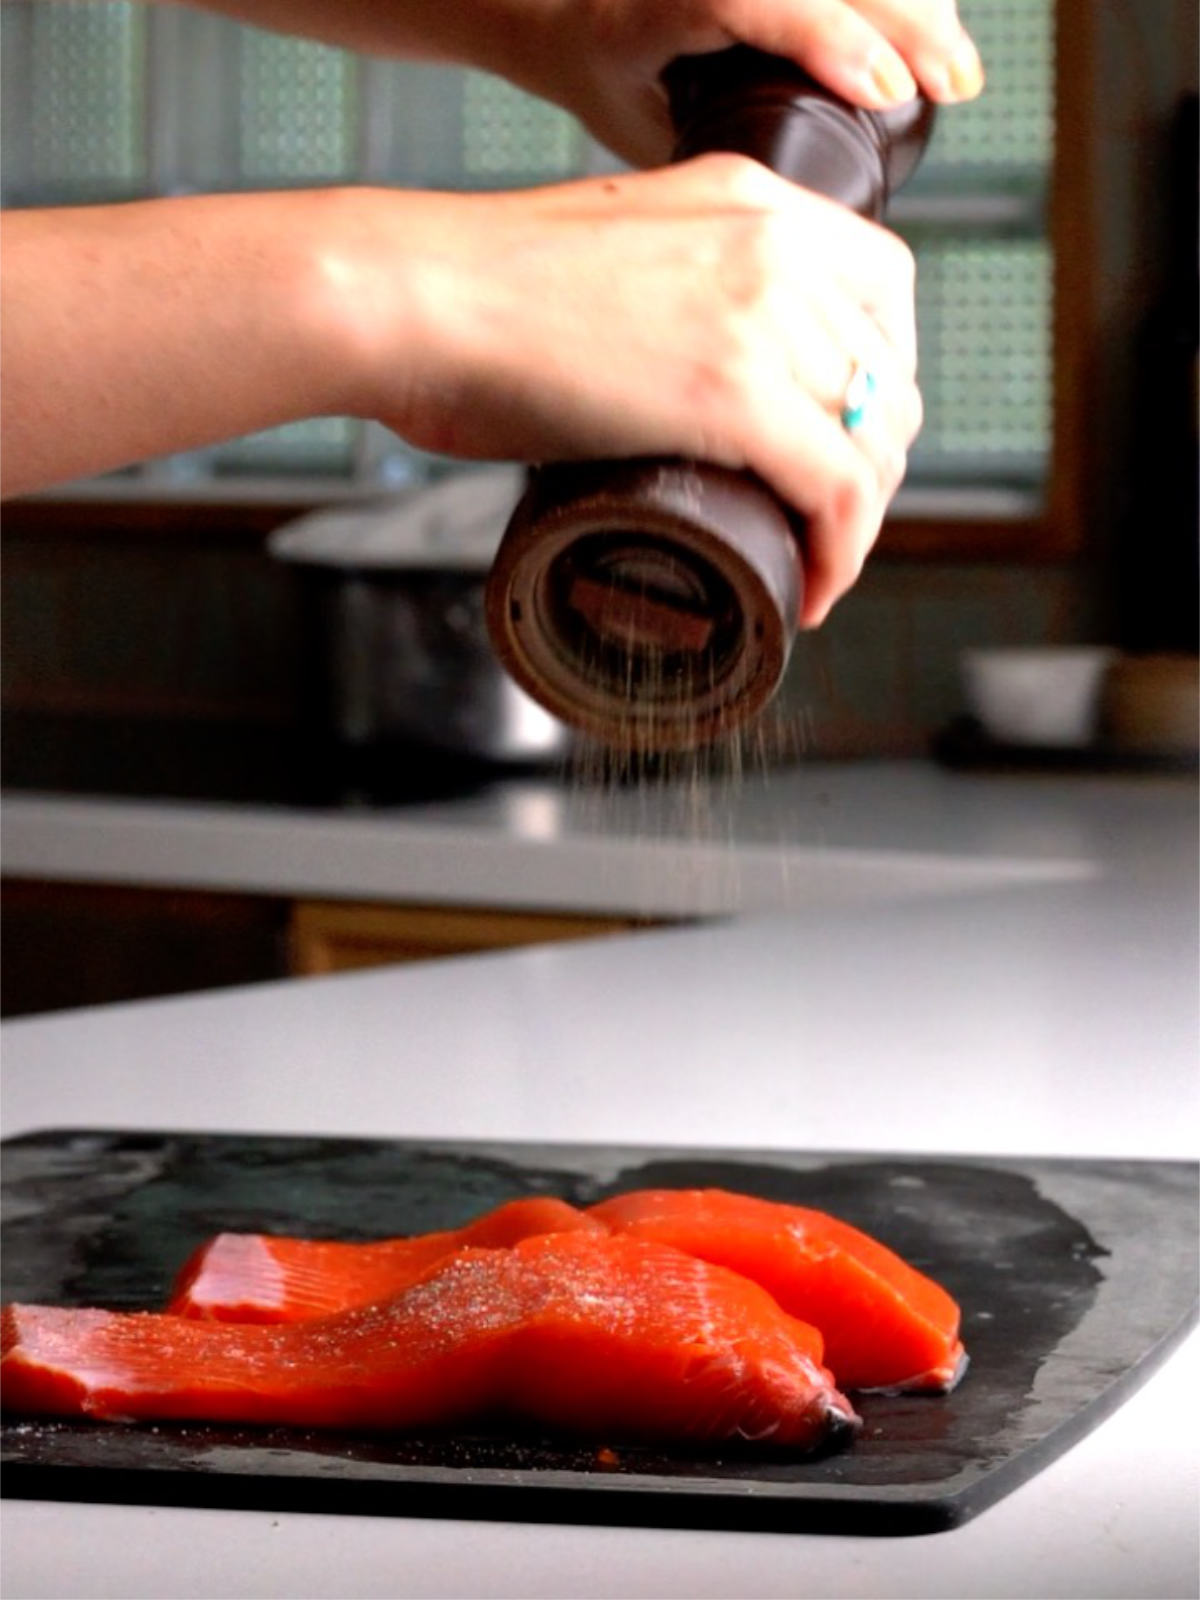 Cracking pepper over two salmon filets on a black cutting board.